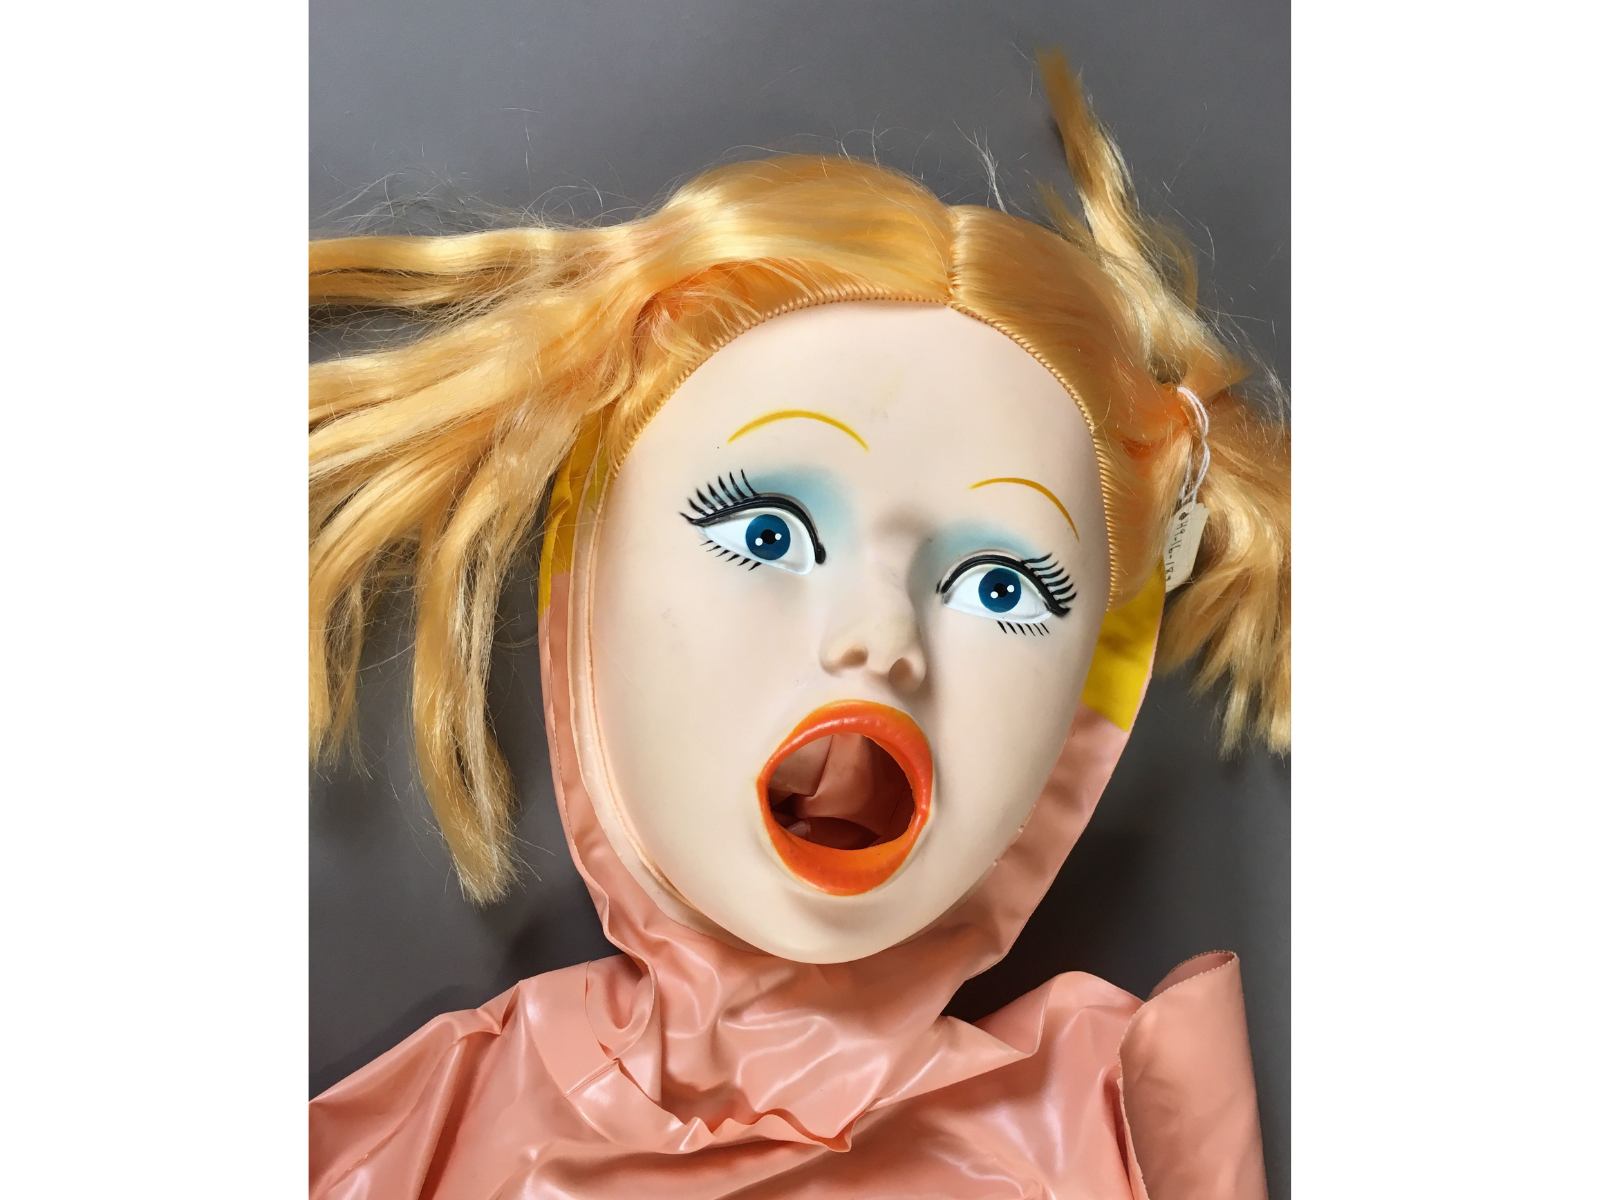 Close-up on the face of an inflatable doll with yellow hair, blue eye shadow, and an open mouth.